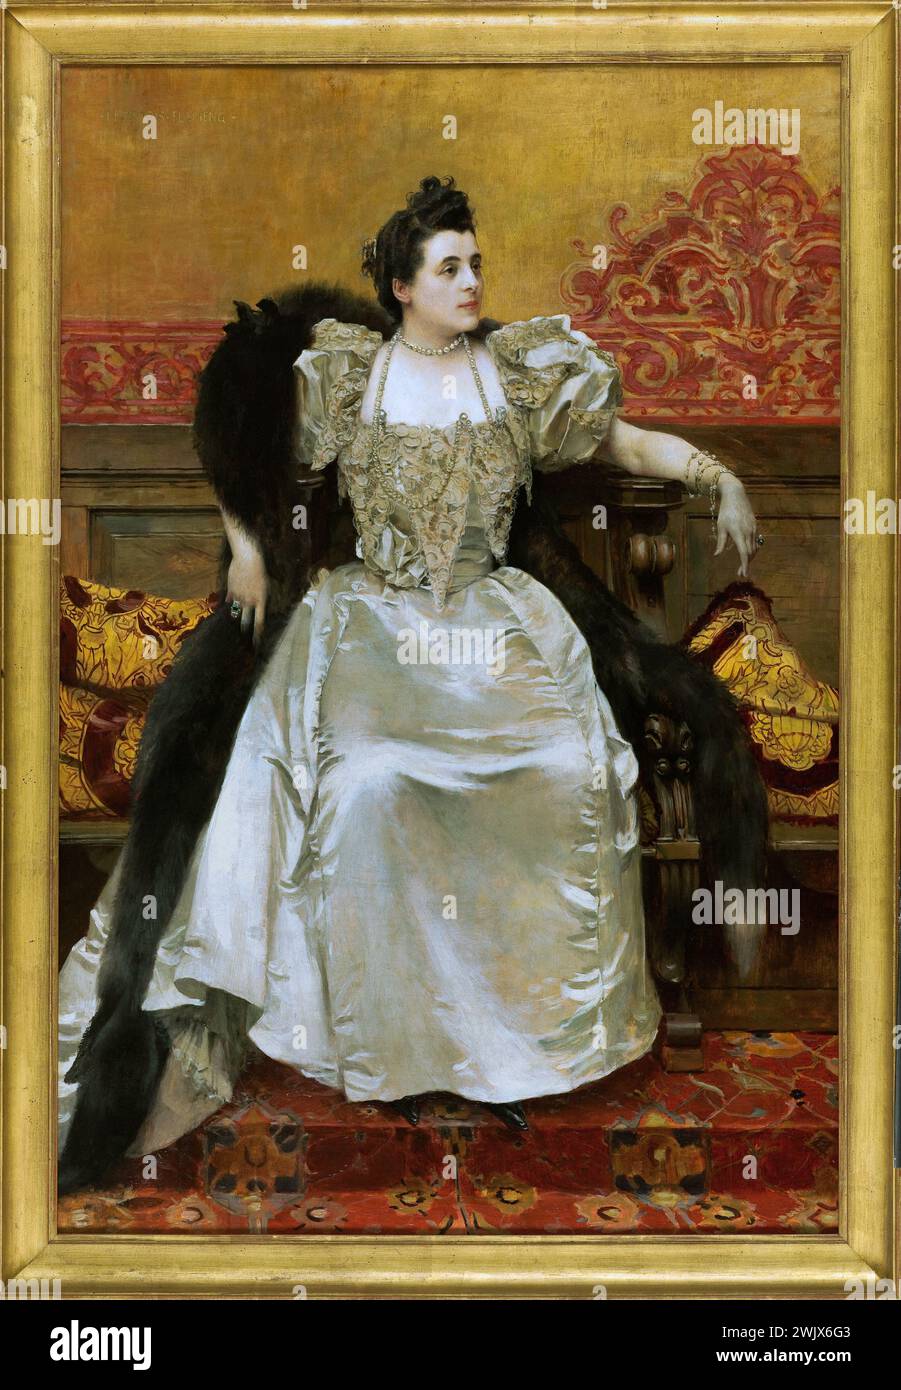 François Flameng (1856-1923). 'Portrait of Madame Gaston Menier'. Oil on wood. 1892. Museum of Fine Arts of the City of Paris, Petit Palais. 76928-26 Seat, white, boa, bourgeoisie, shiny, pearl necklace, in the foot, woman, fur, oil on wood, portrait, satin, long, alone, alone, dress Stock Photo